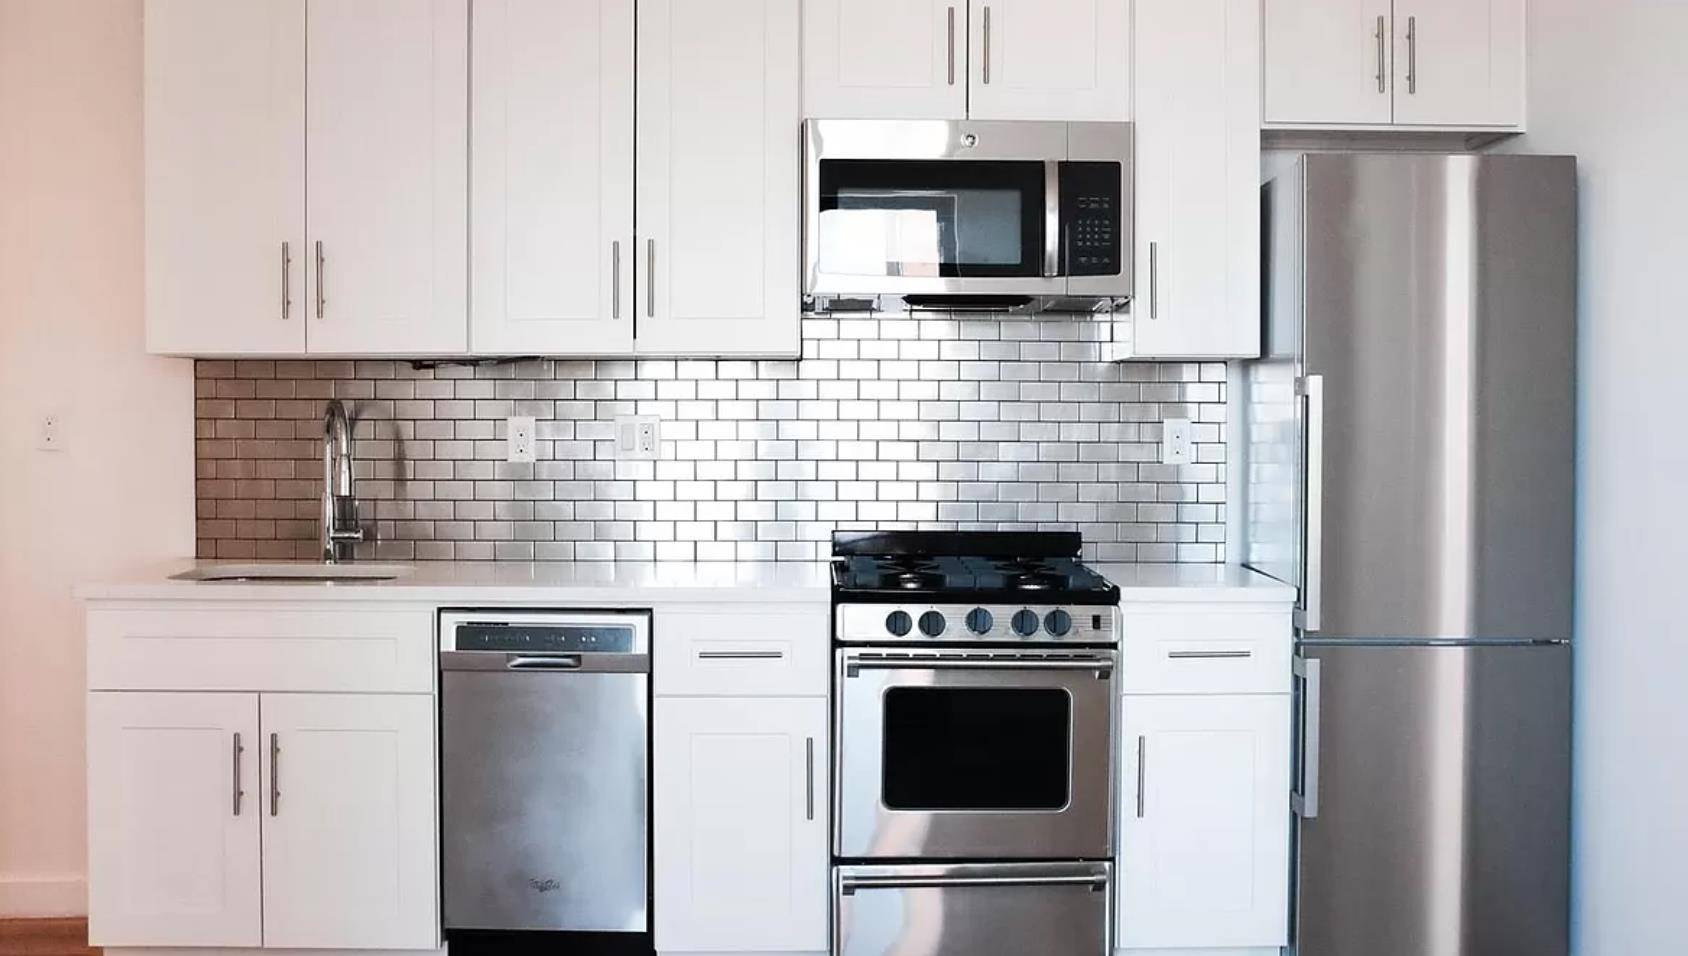 MUST SEE 2 BEDROOM ! Newly Renovated Building in the Trendy South Slope of Brooklyn.